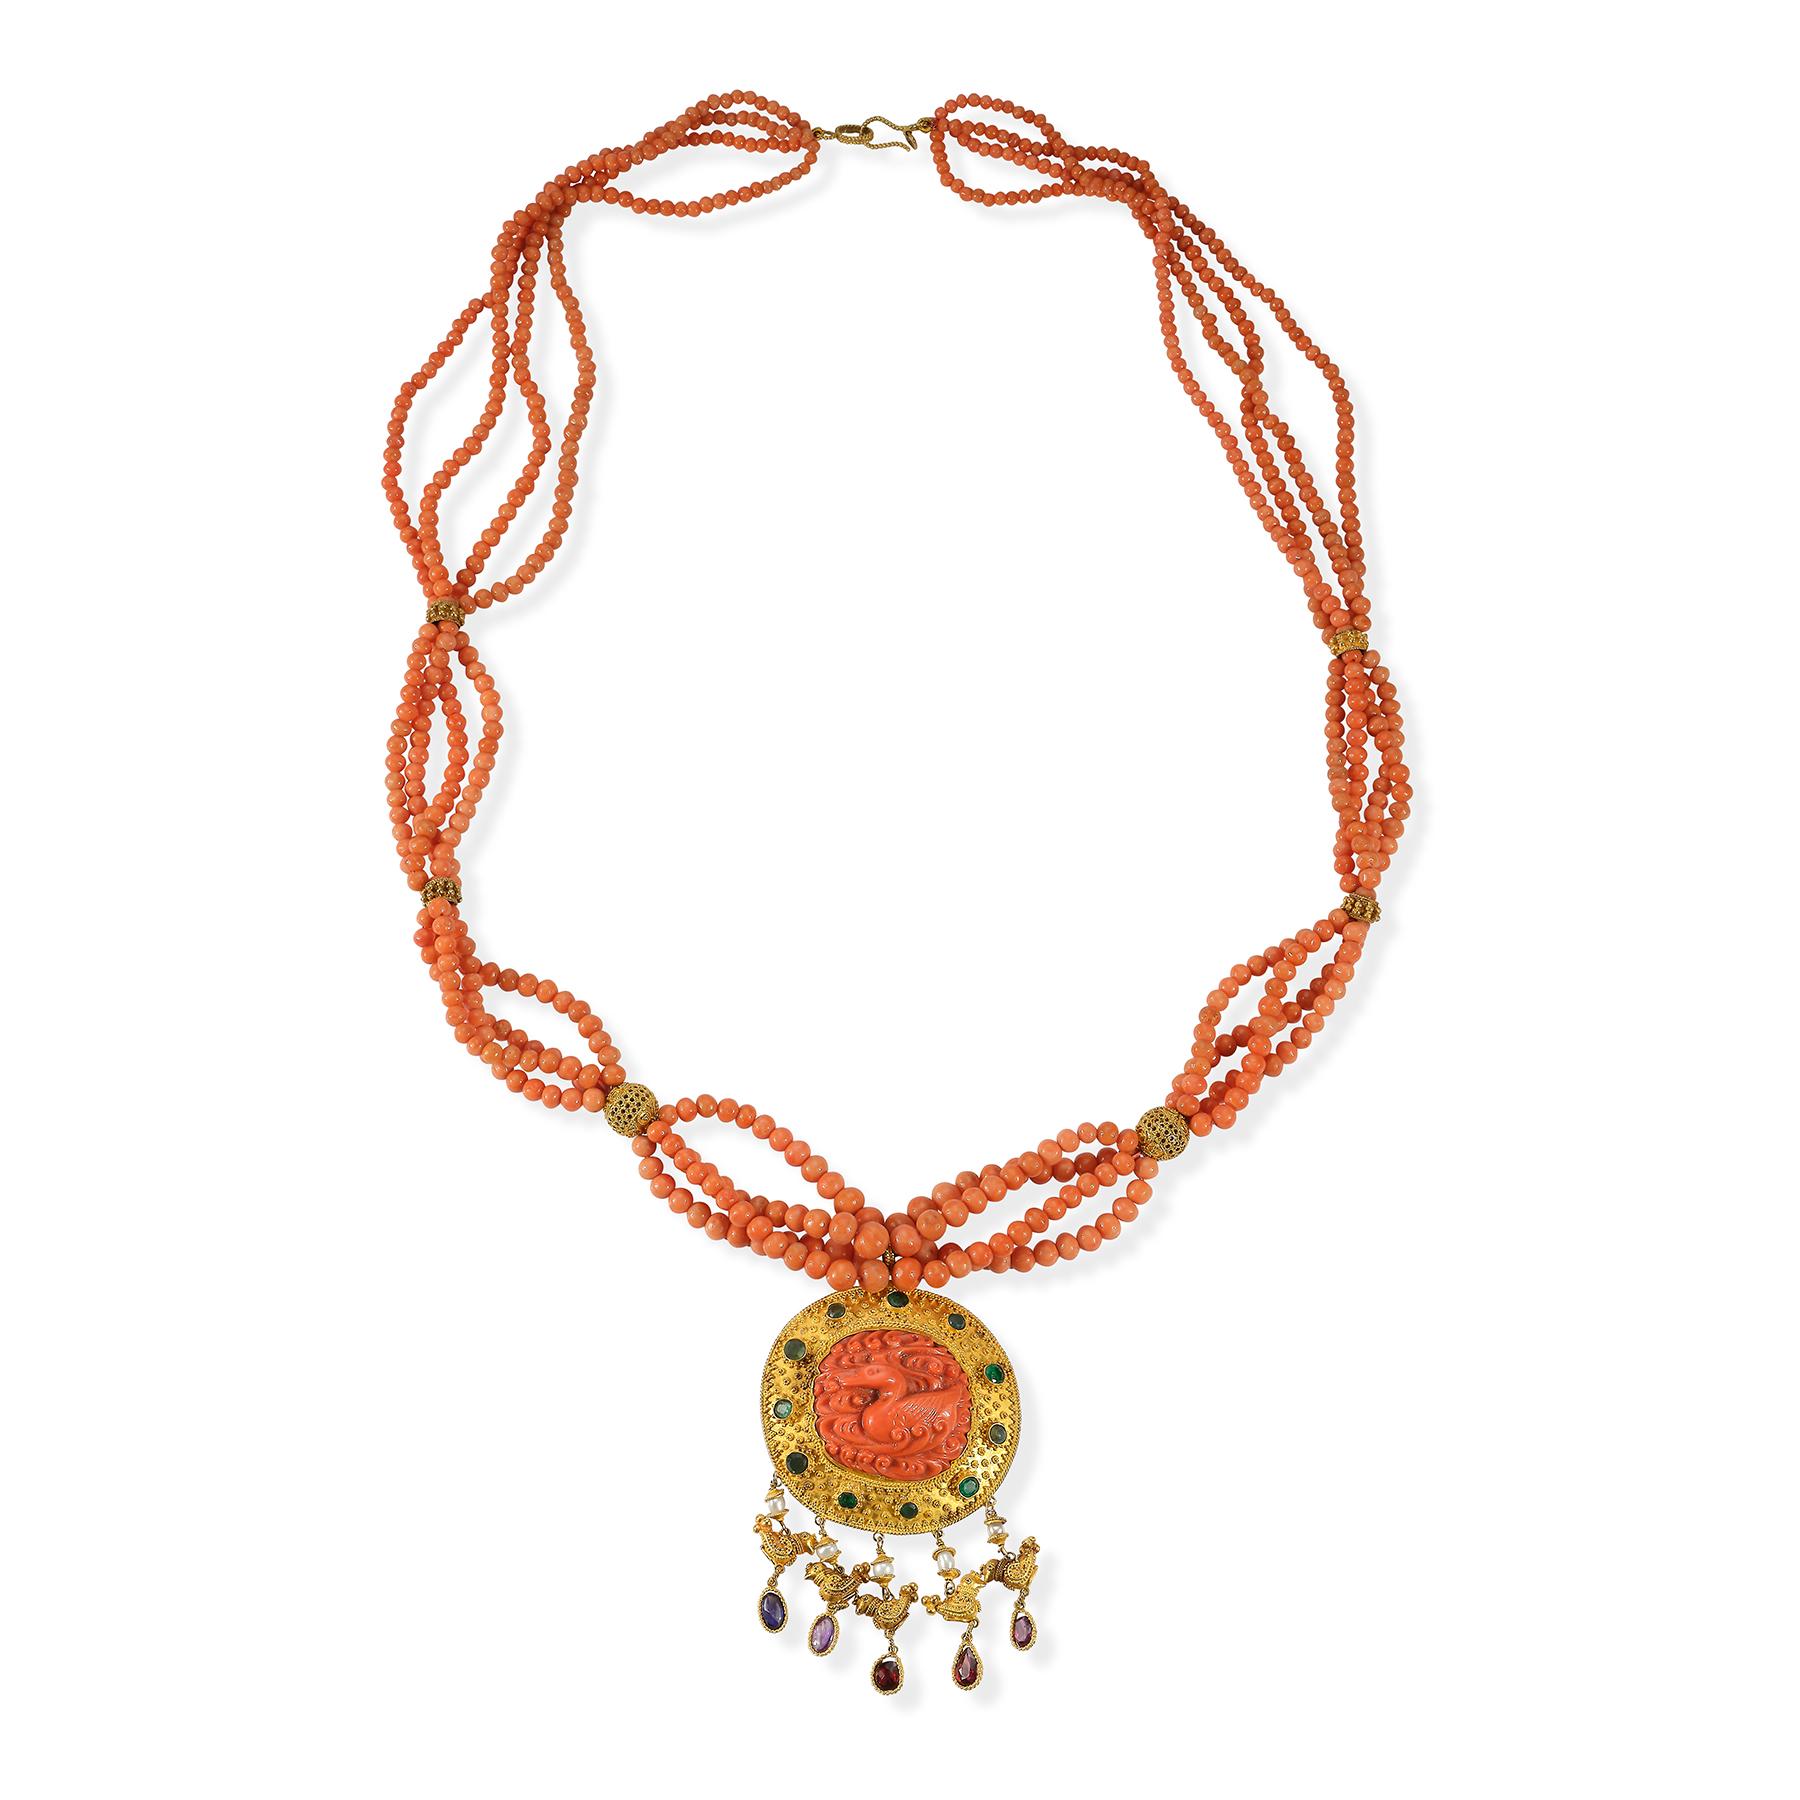 Coral & Gold Multi Strand Fish Pendant Necklace 

4 strands of coral beads connected by gold spacers set with a carved coral fish pendant set with emeralds and garnets and gold birds.

Measurements: 32